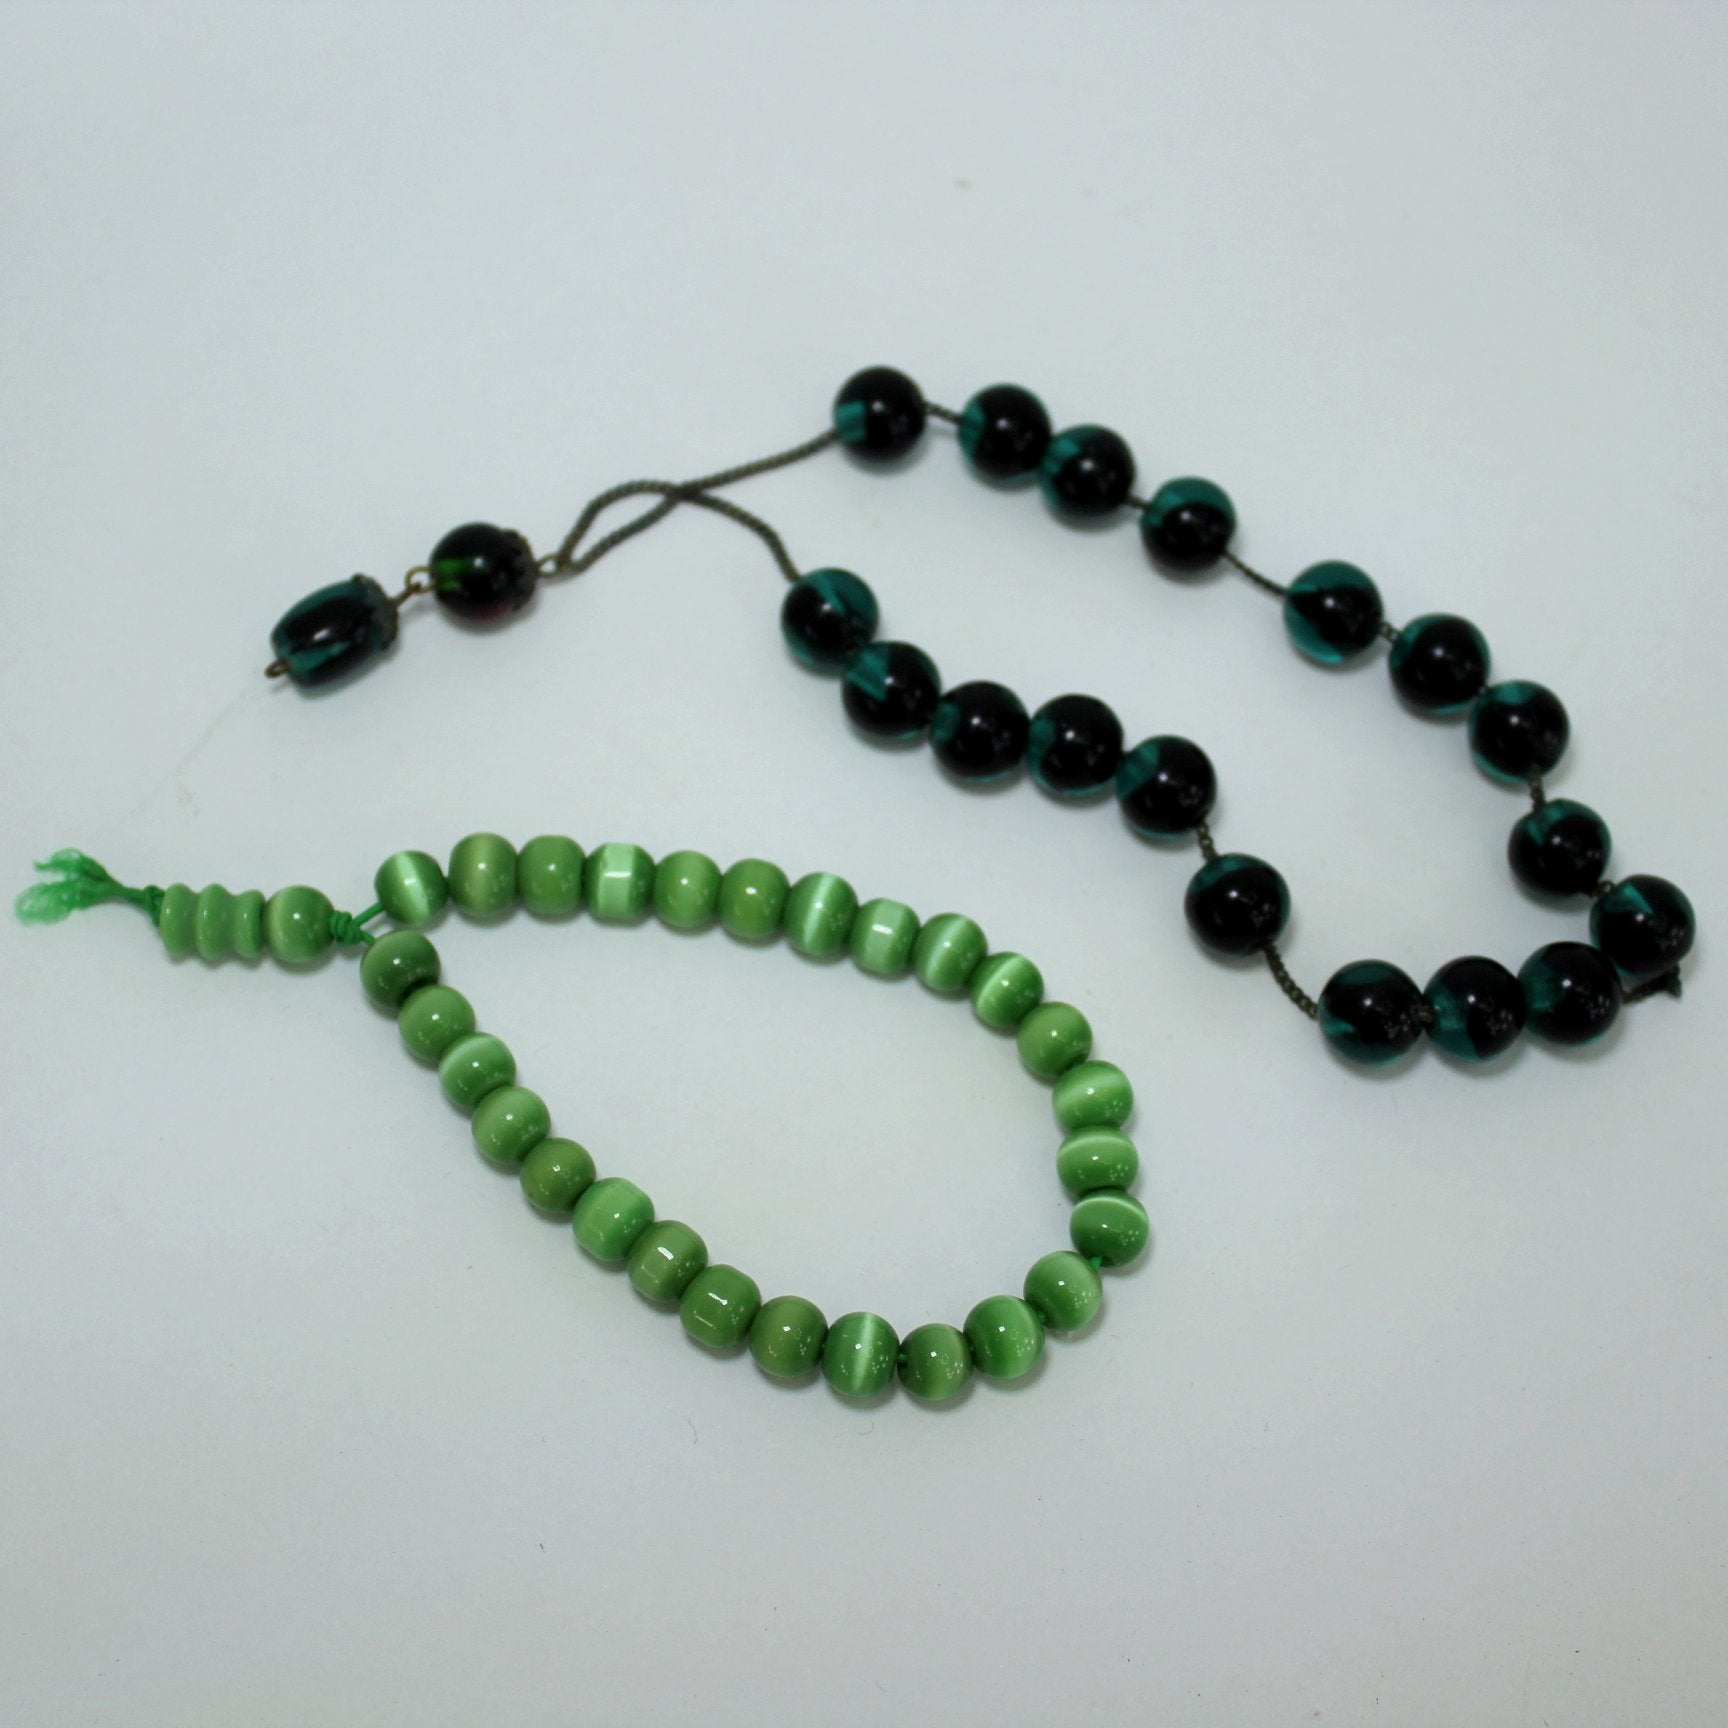 Prayer Beads Vintage on Chain Newer Cord Strung 2 Sets very nice feel to vintage beads